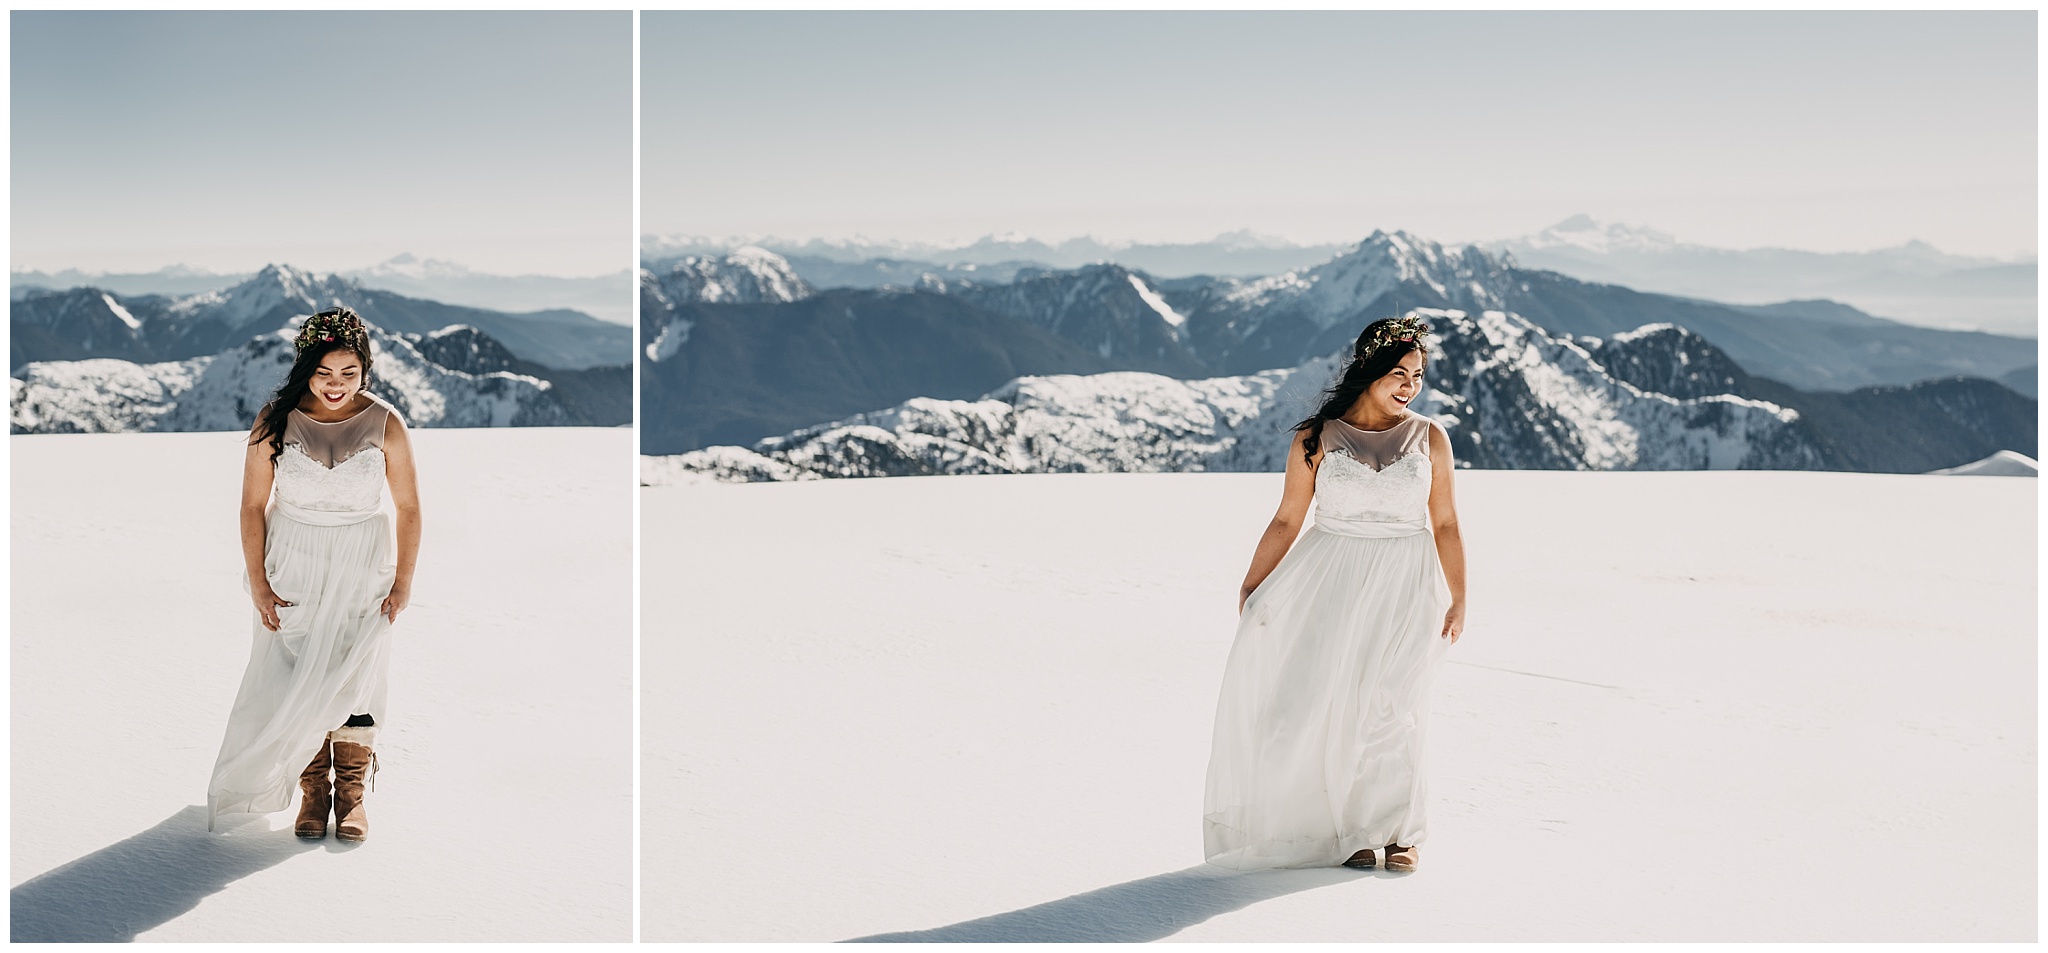 bride snow boots mountaintop sunny snowy sky helicopters wedding